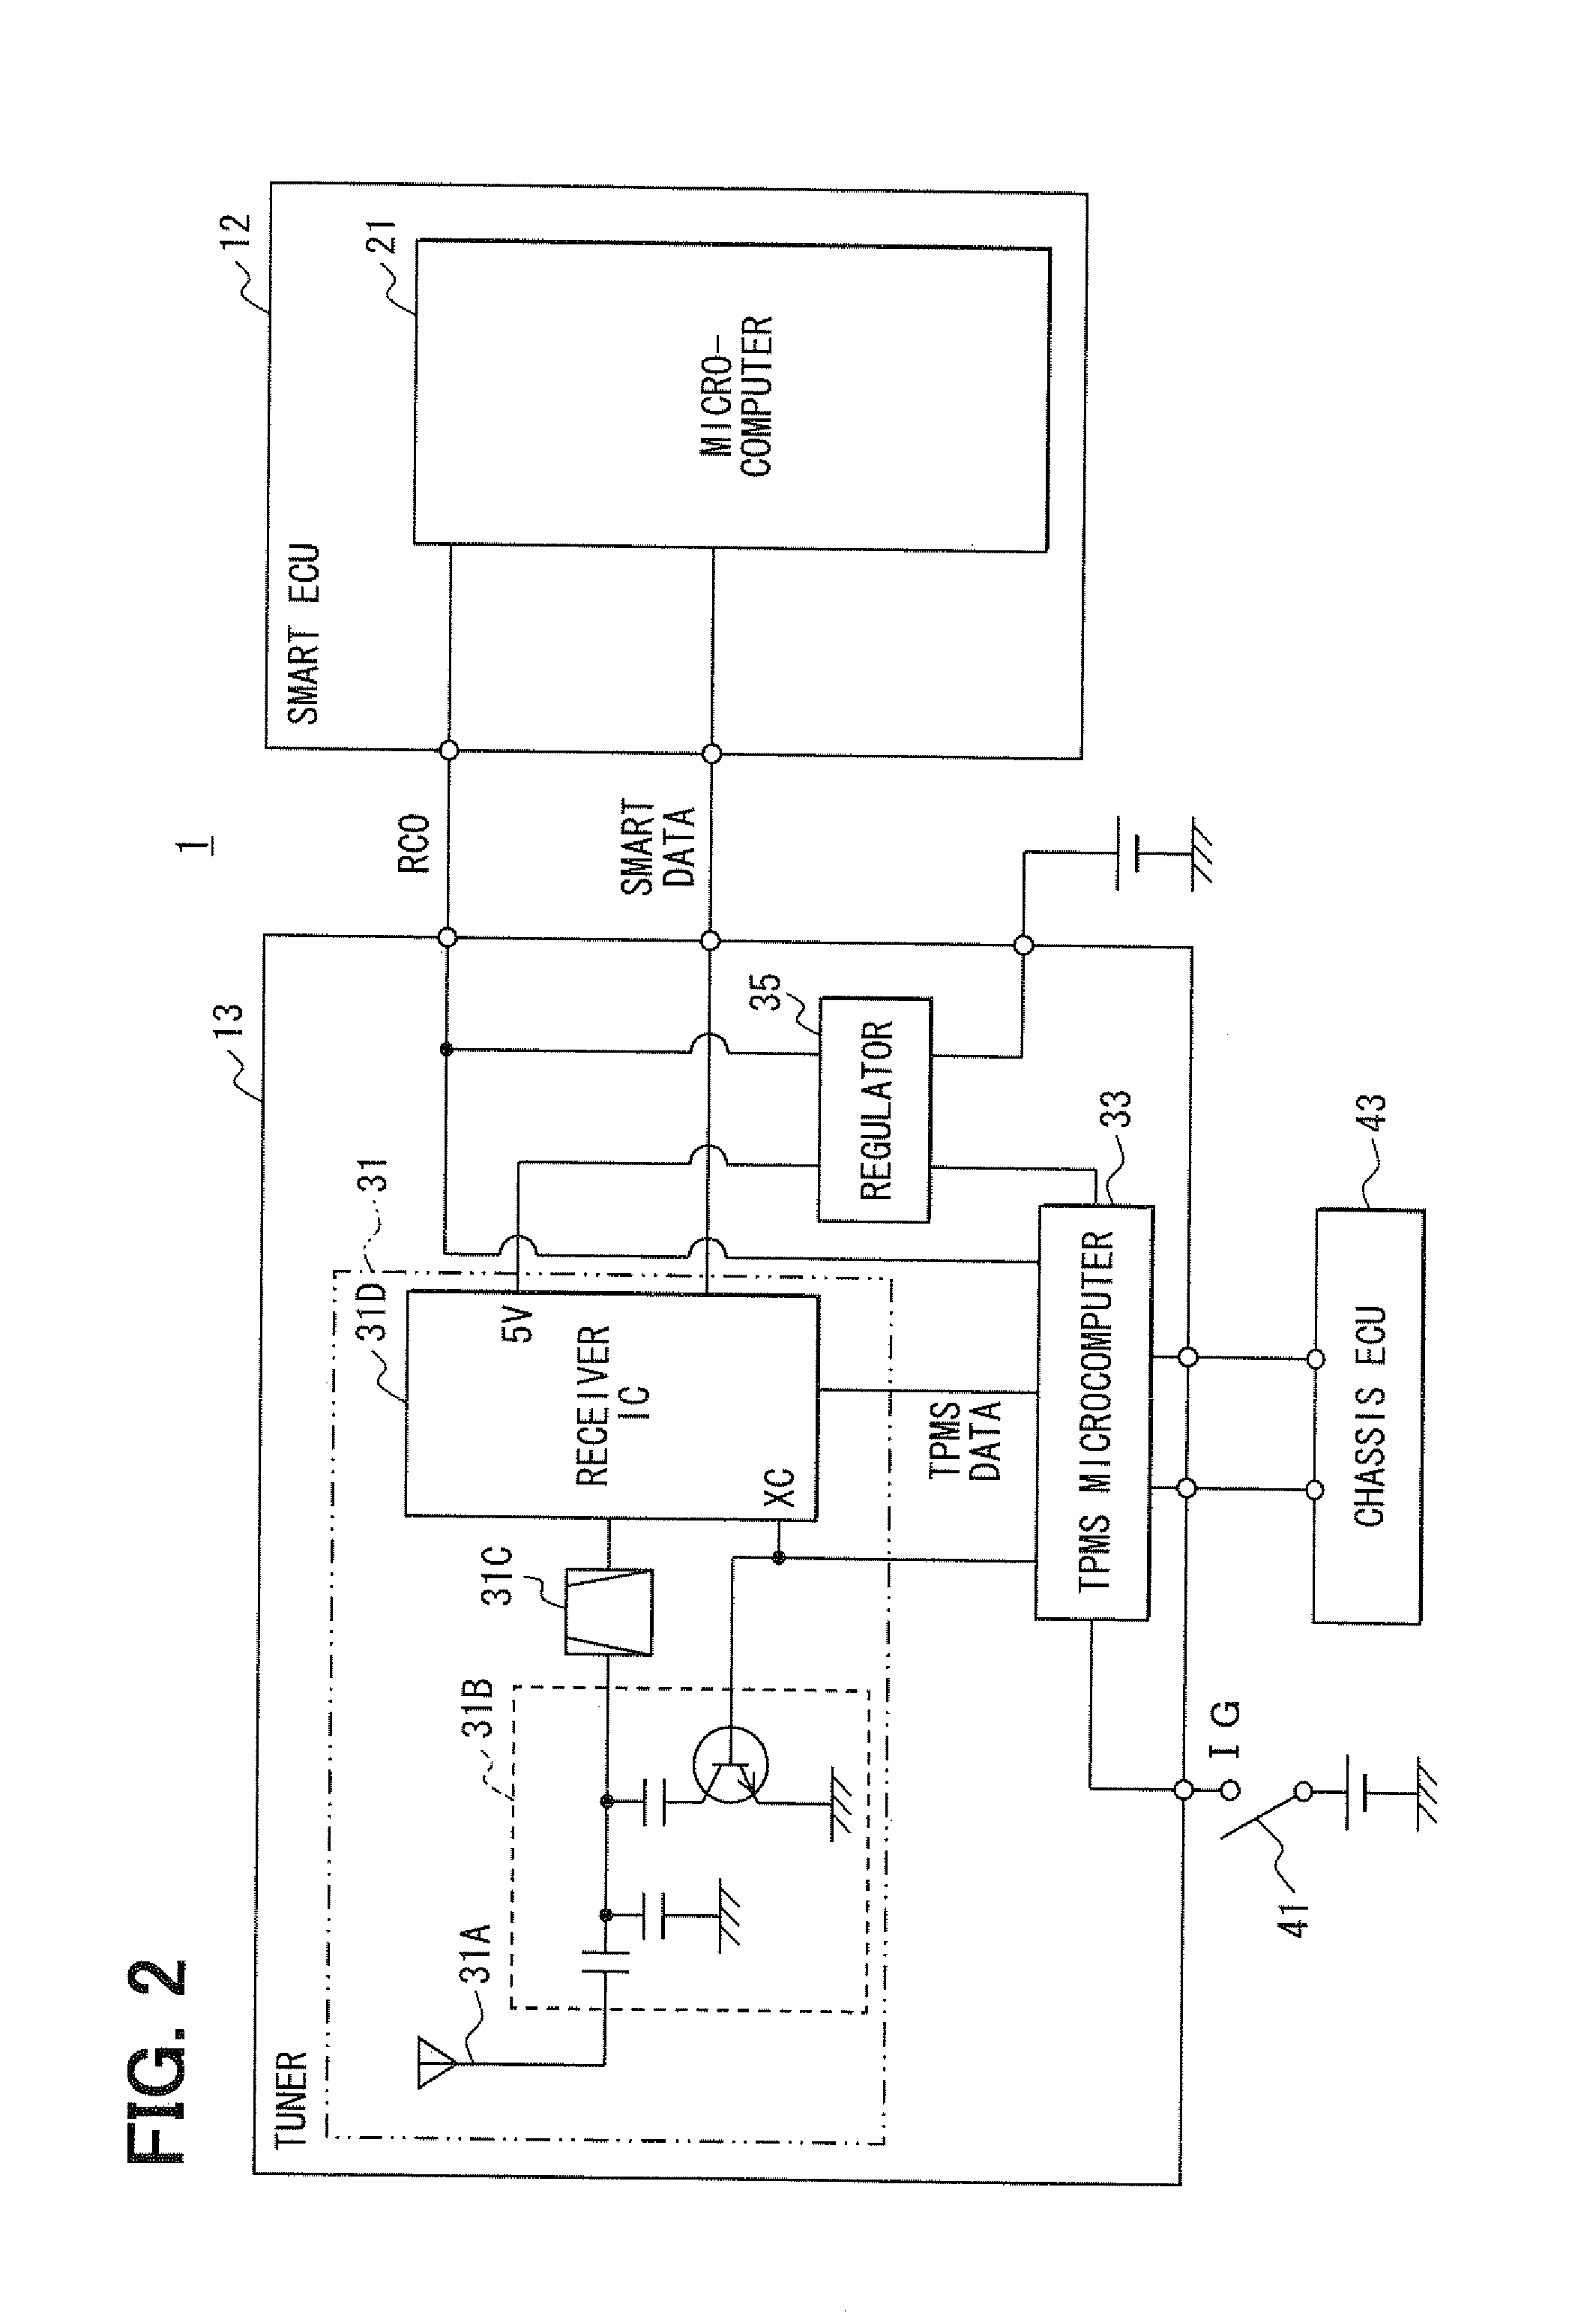 In-vehicle device and vehicular combined control system